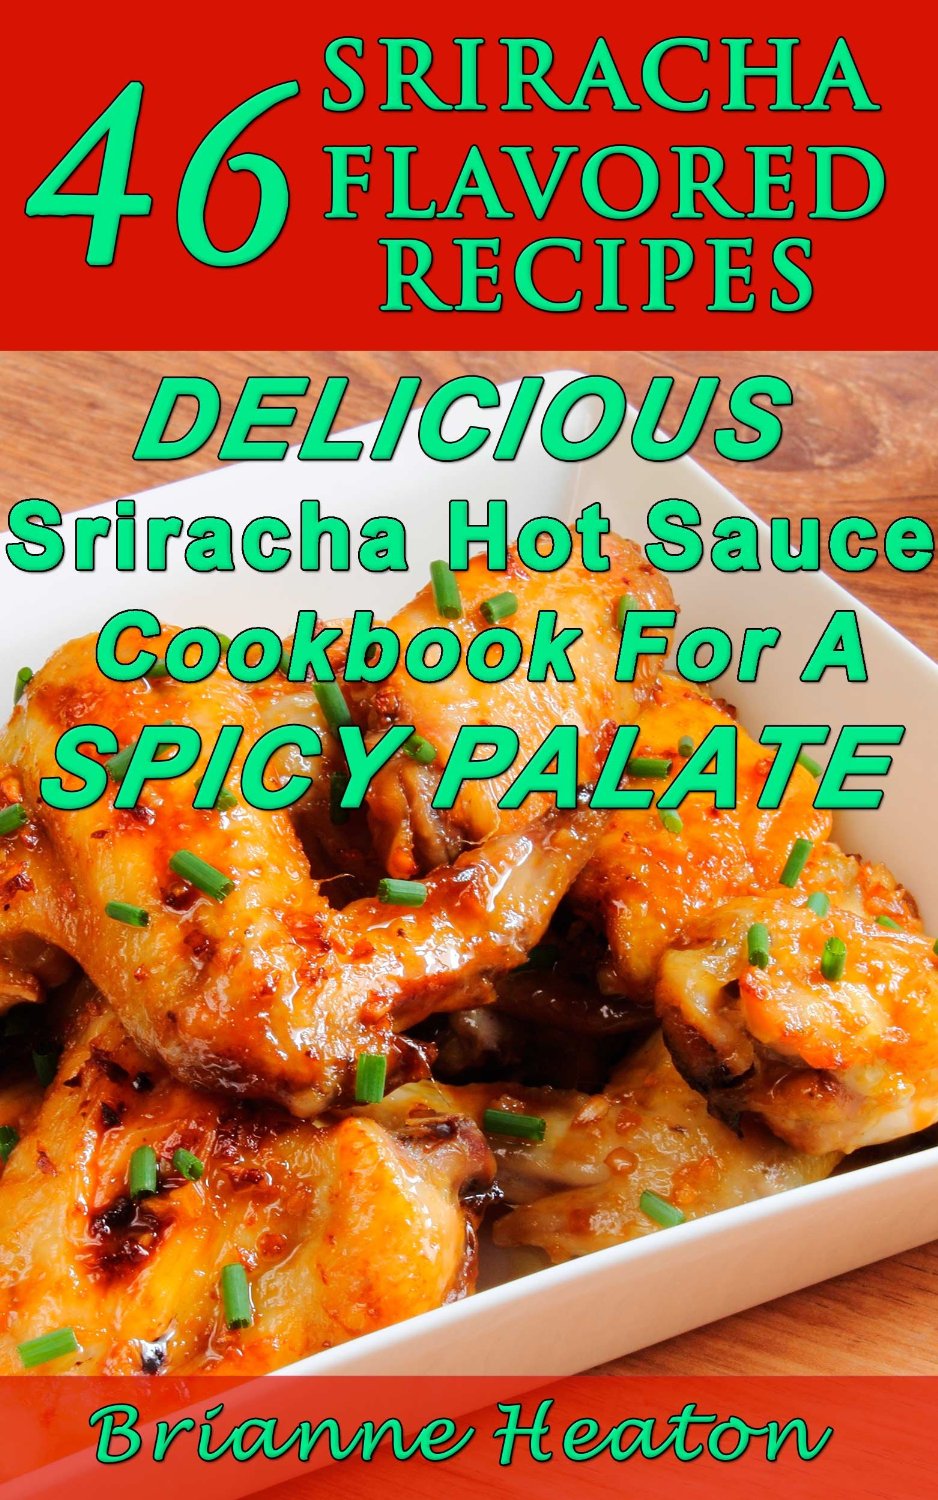 46 Sriracha Flavored Recipes: Delicious Sriracha Hot Sauce Cookbook For A Spicy Palate by Frank Yim